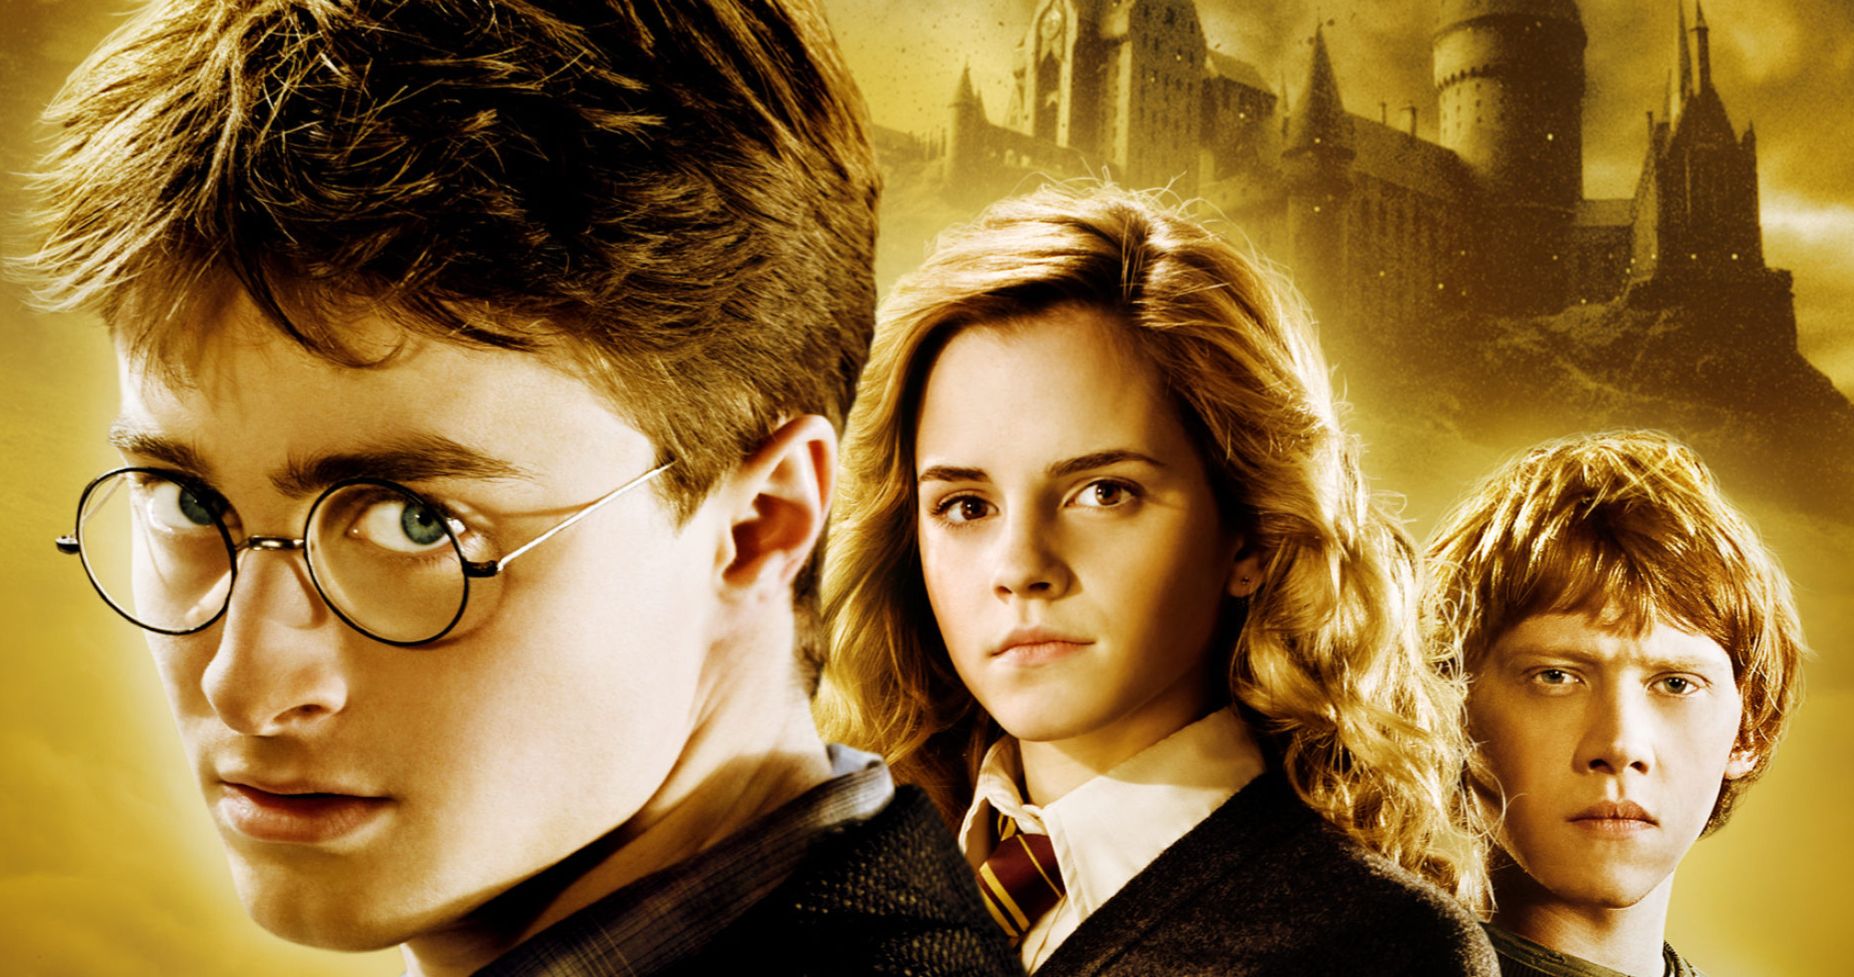 Harry Potter Movie Collection Will Stream on NBC's Peacock This Halloween